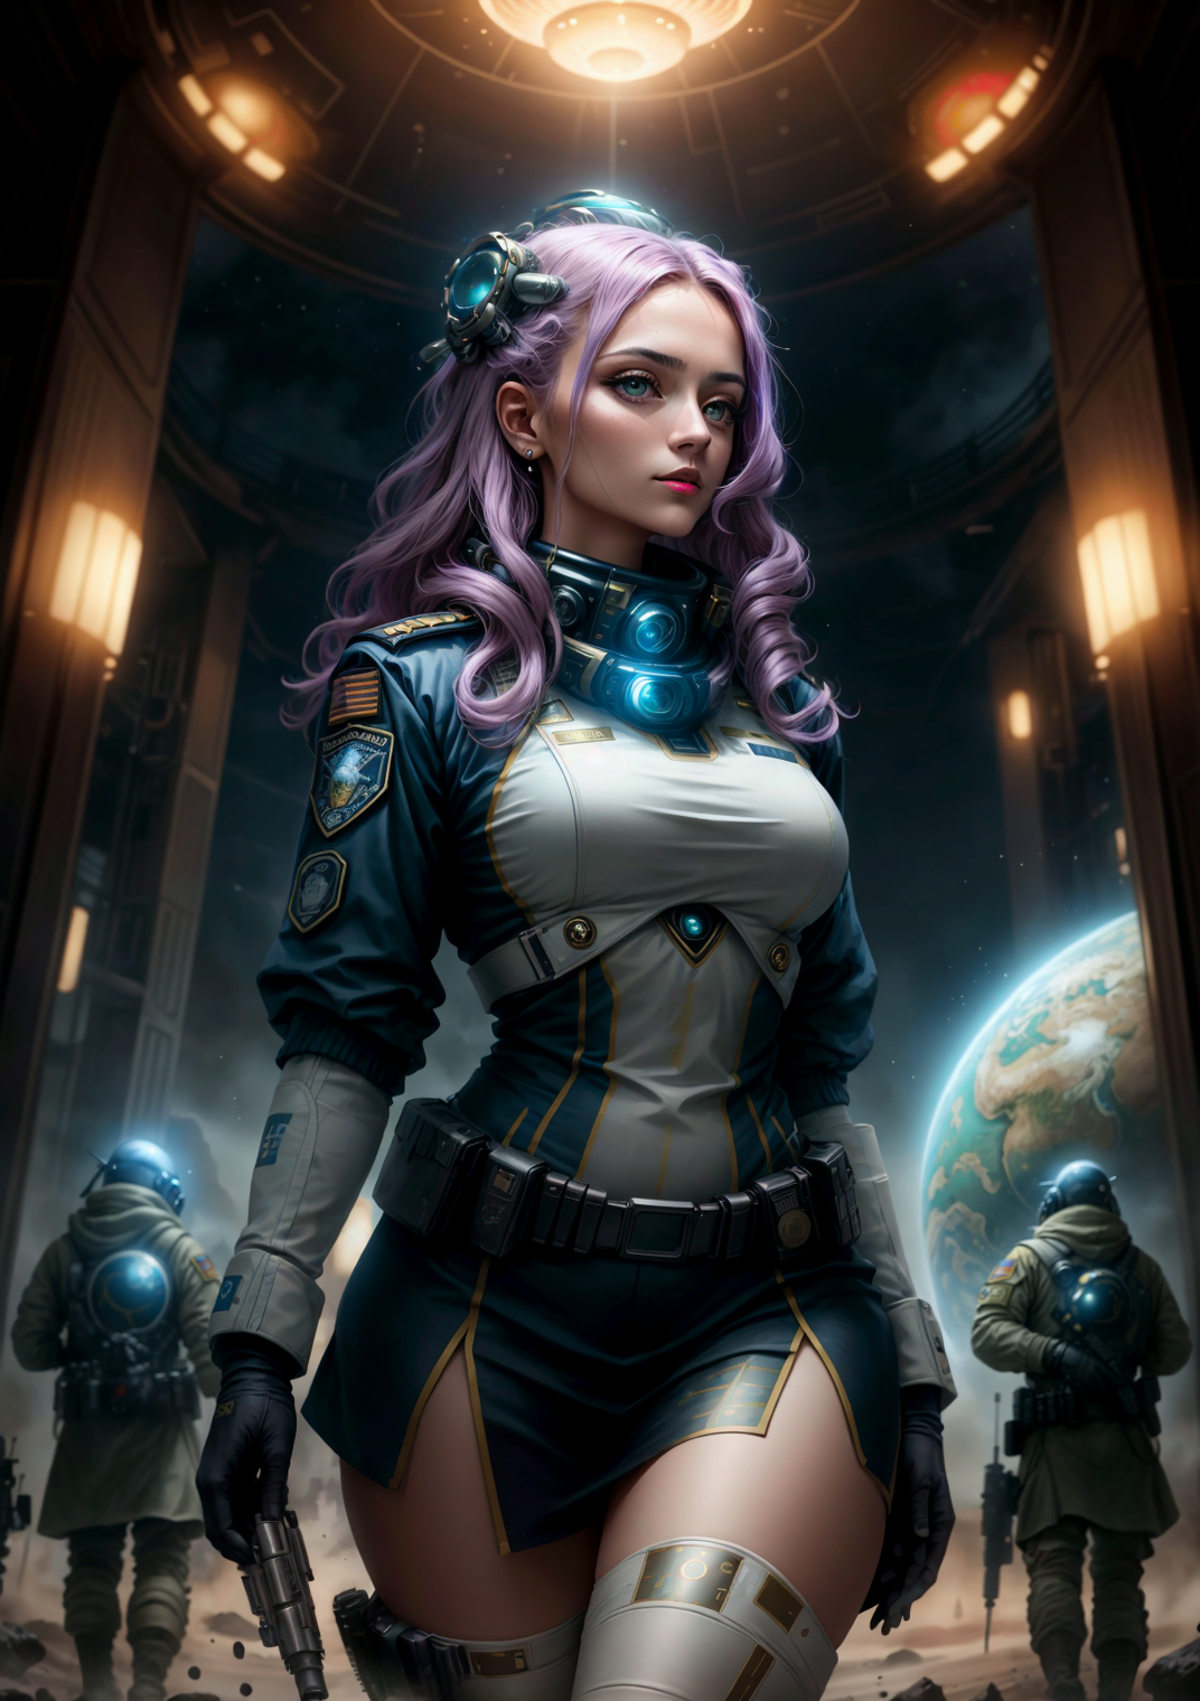 Sci-Fi Outfits - Wildcards image by Diva